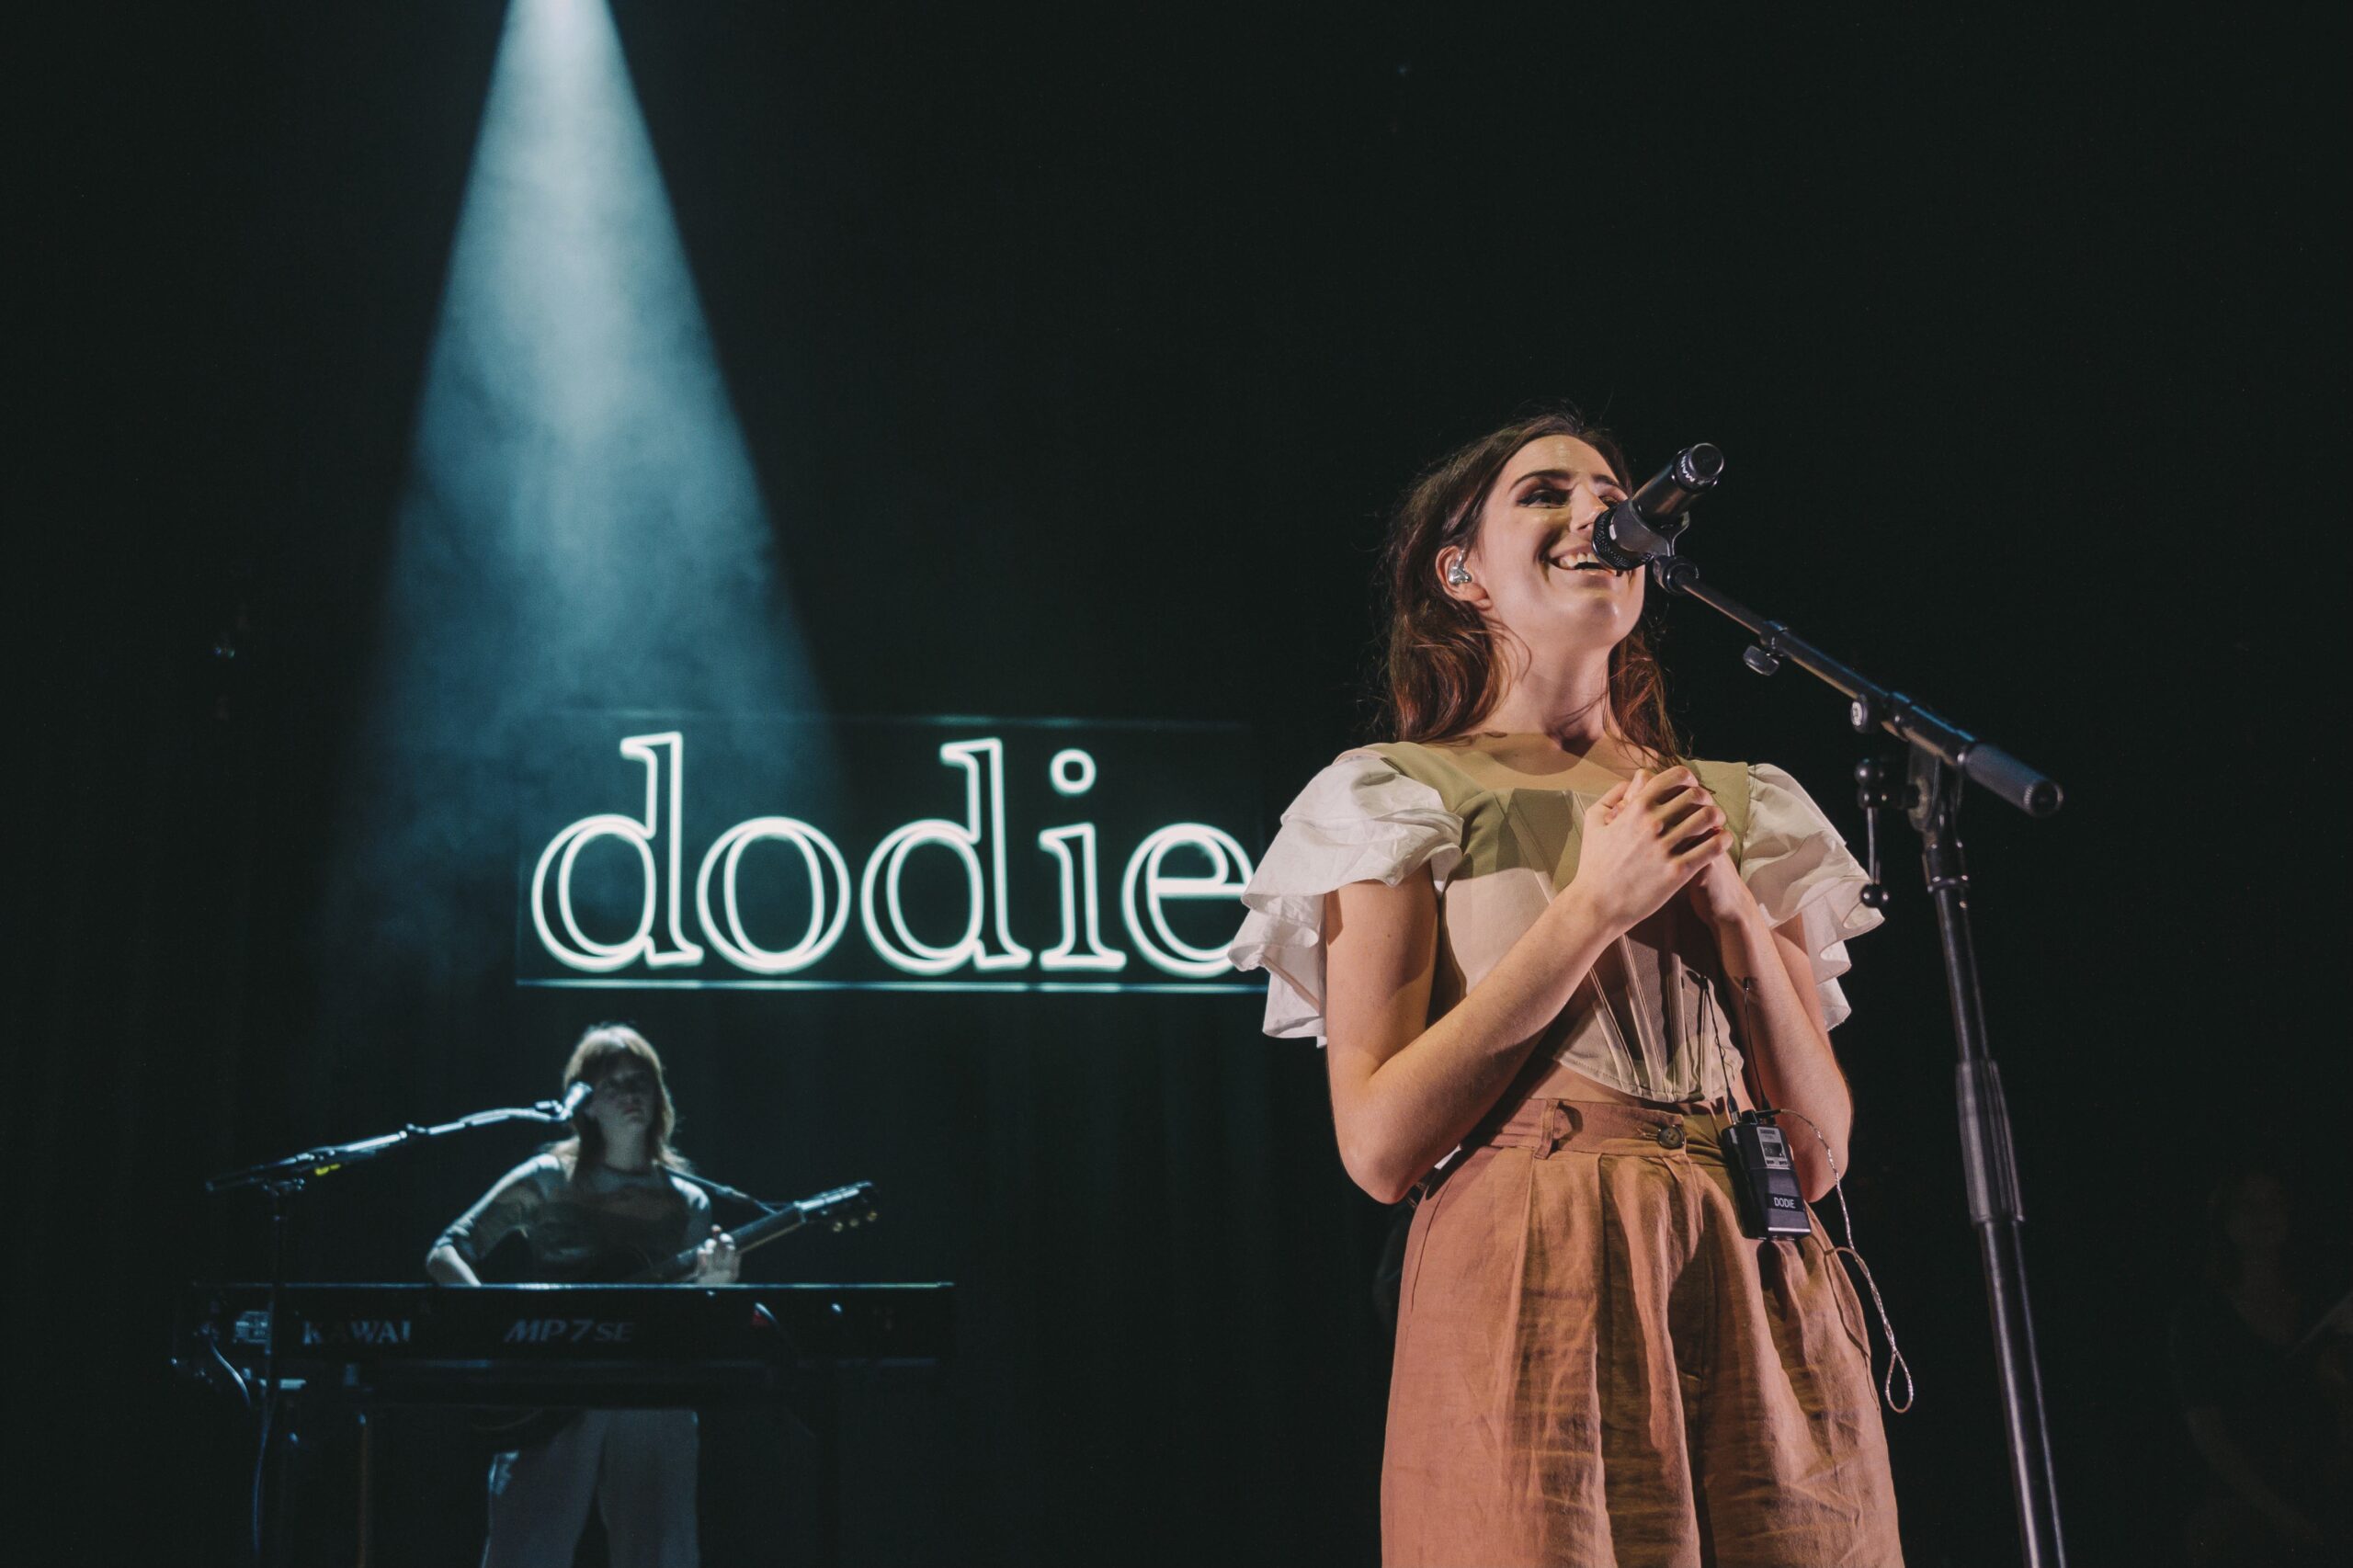 Dodie’s UK tour concludes in London